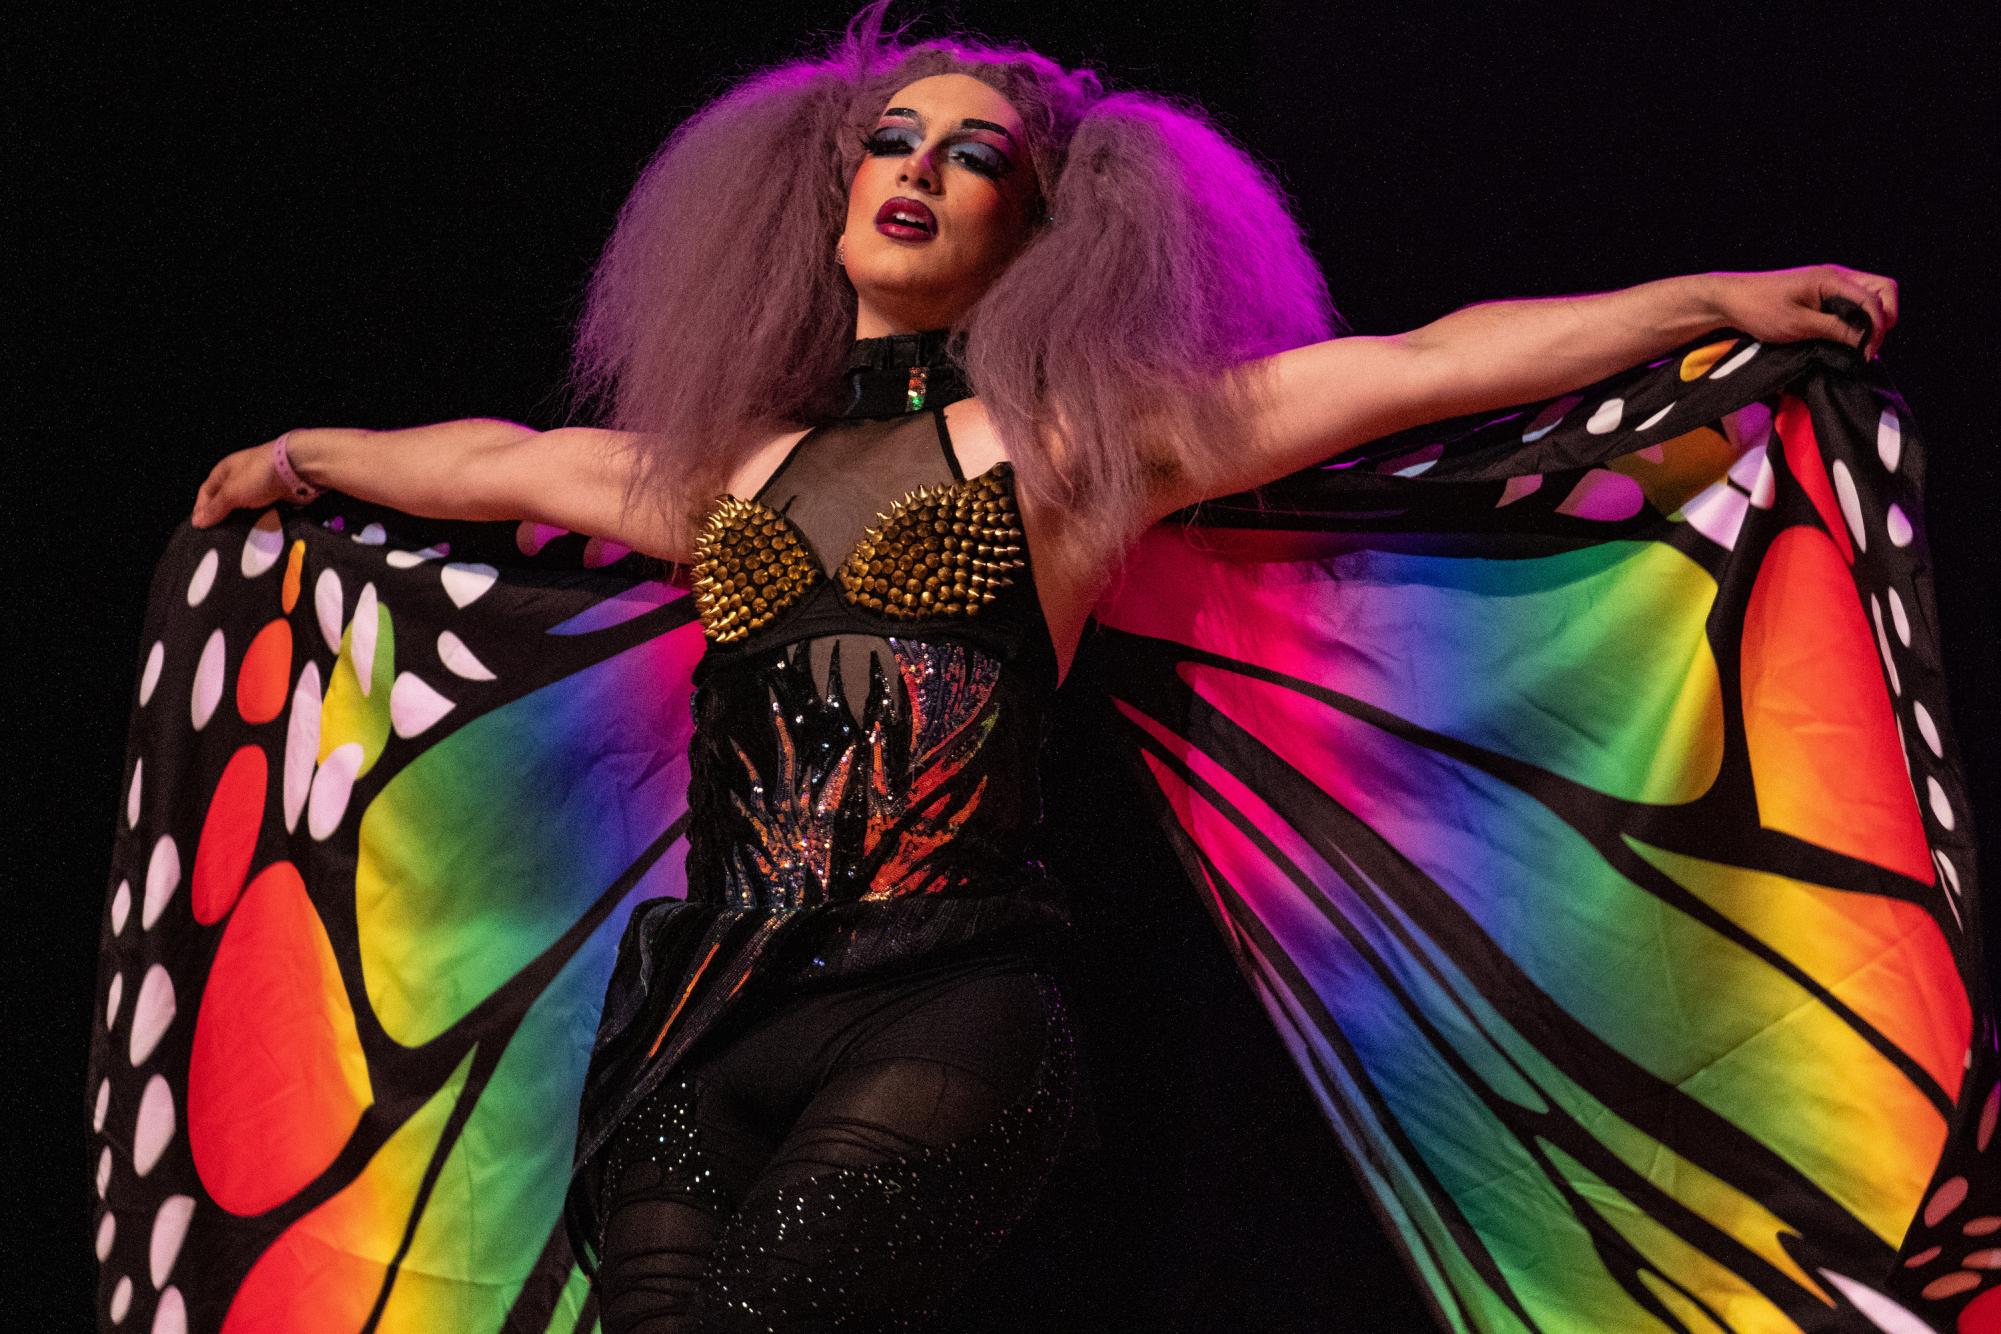 Drag Queen Lavender Haze (she/they) performing in LaSells Center in Corvallis, OR on June 2, 2023.